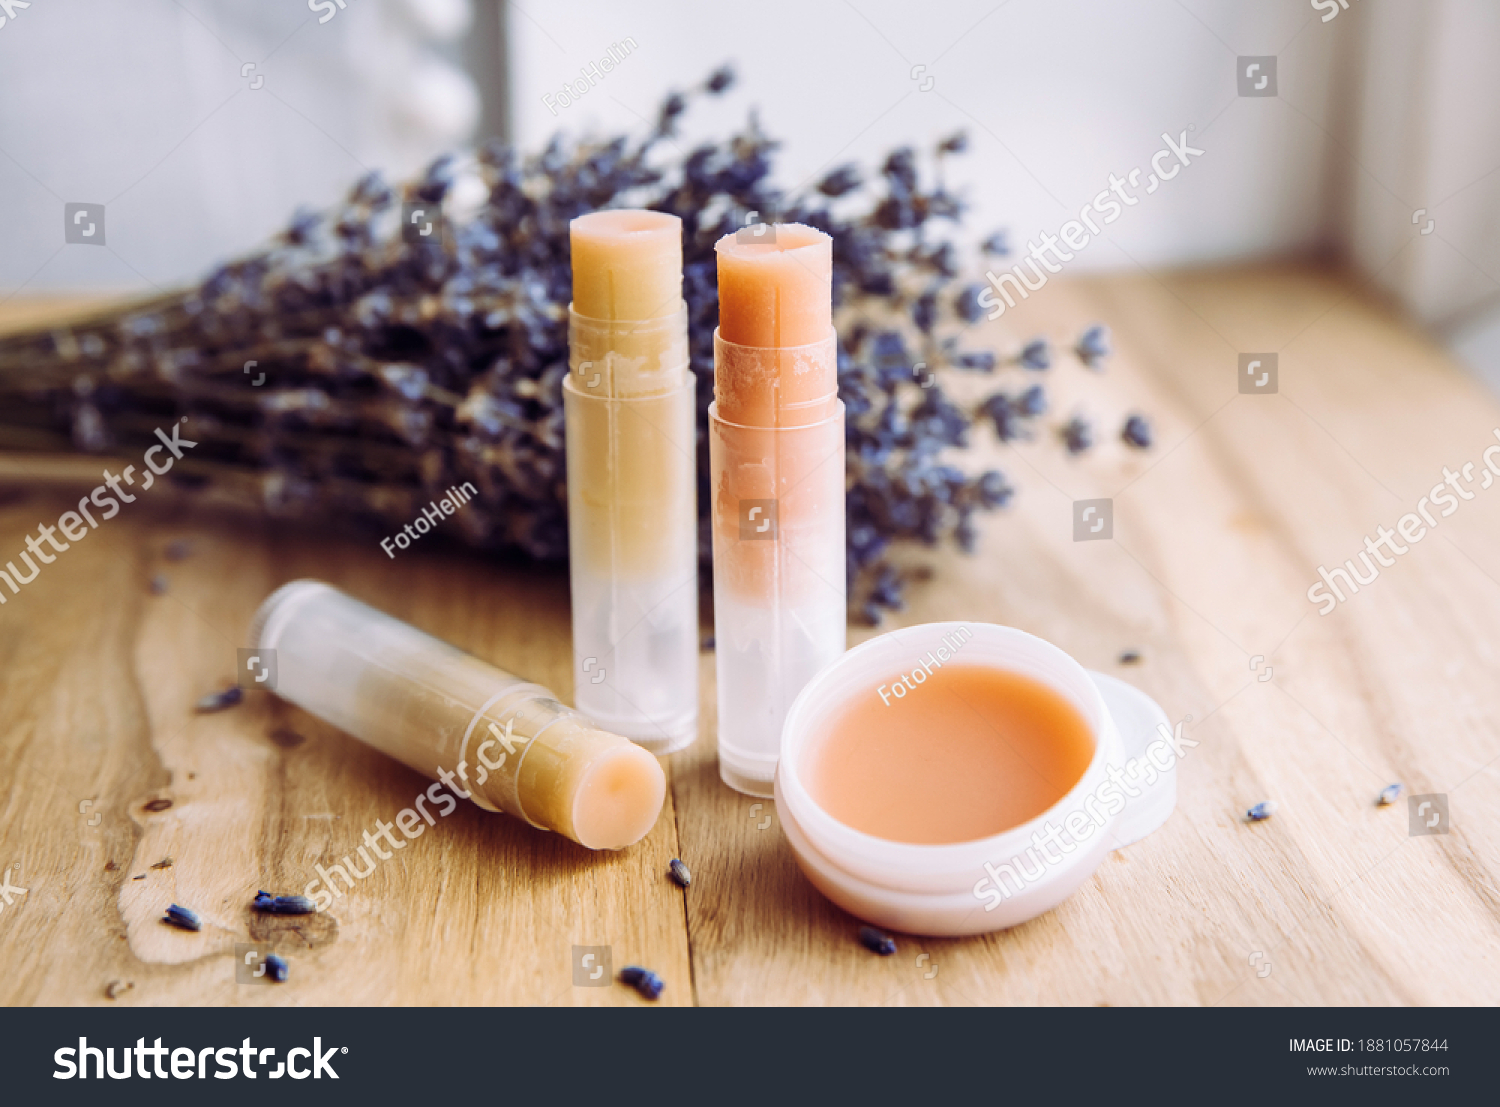 Make homemade natural organic ingredients lip balm. Handmade lip balm and lipstick inside container on natural wooden background and lavender for decoration. #1881057844